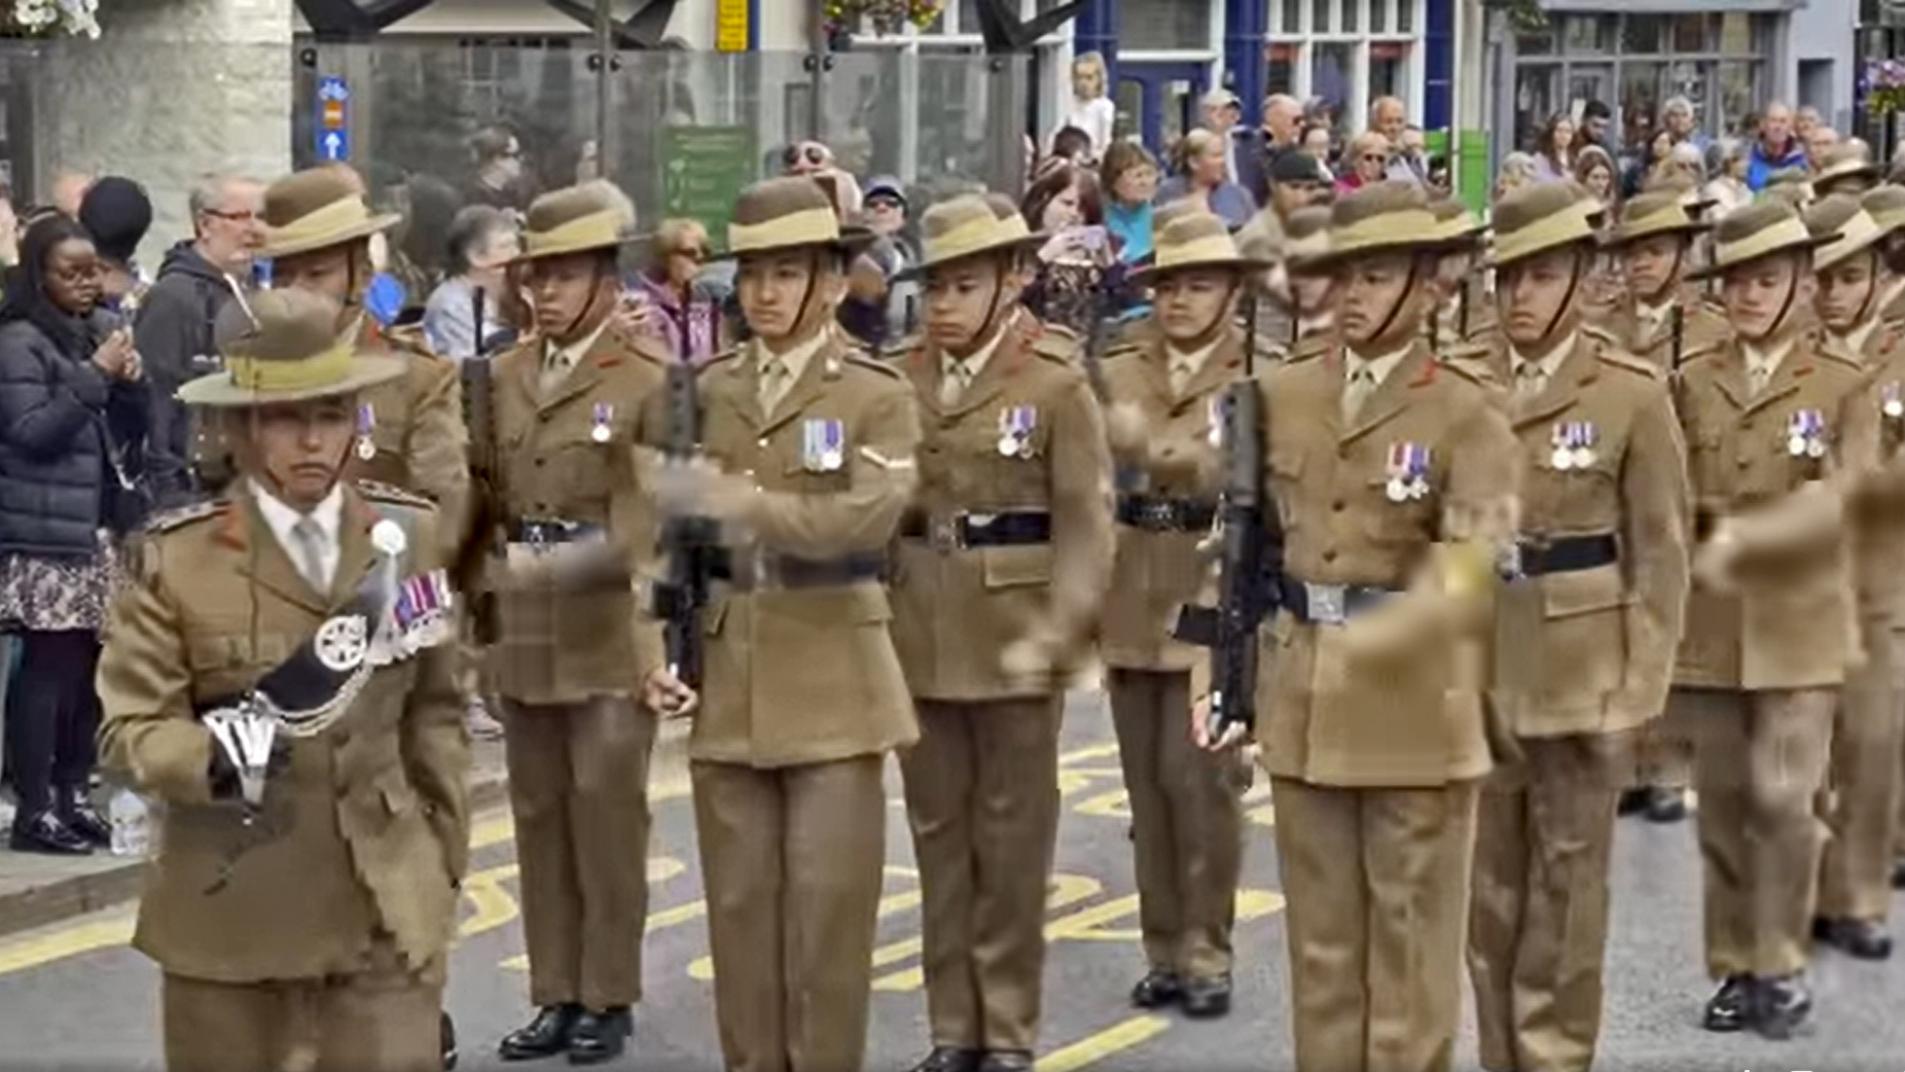 The annual Gurkha parade in Brecon town, Wales